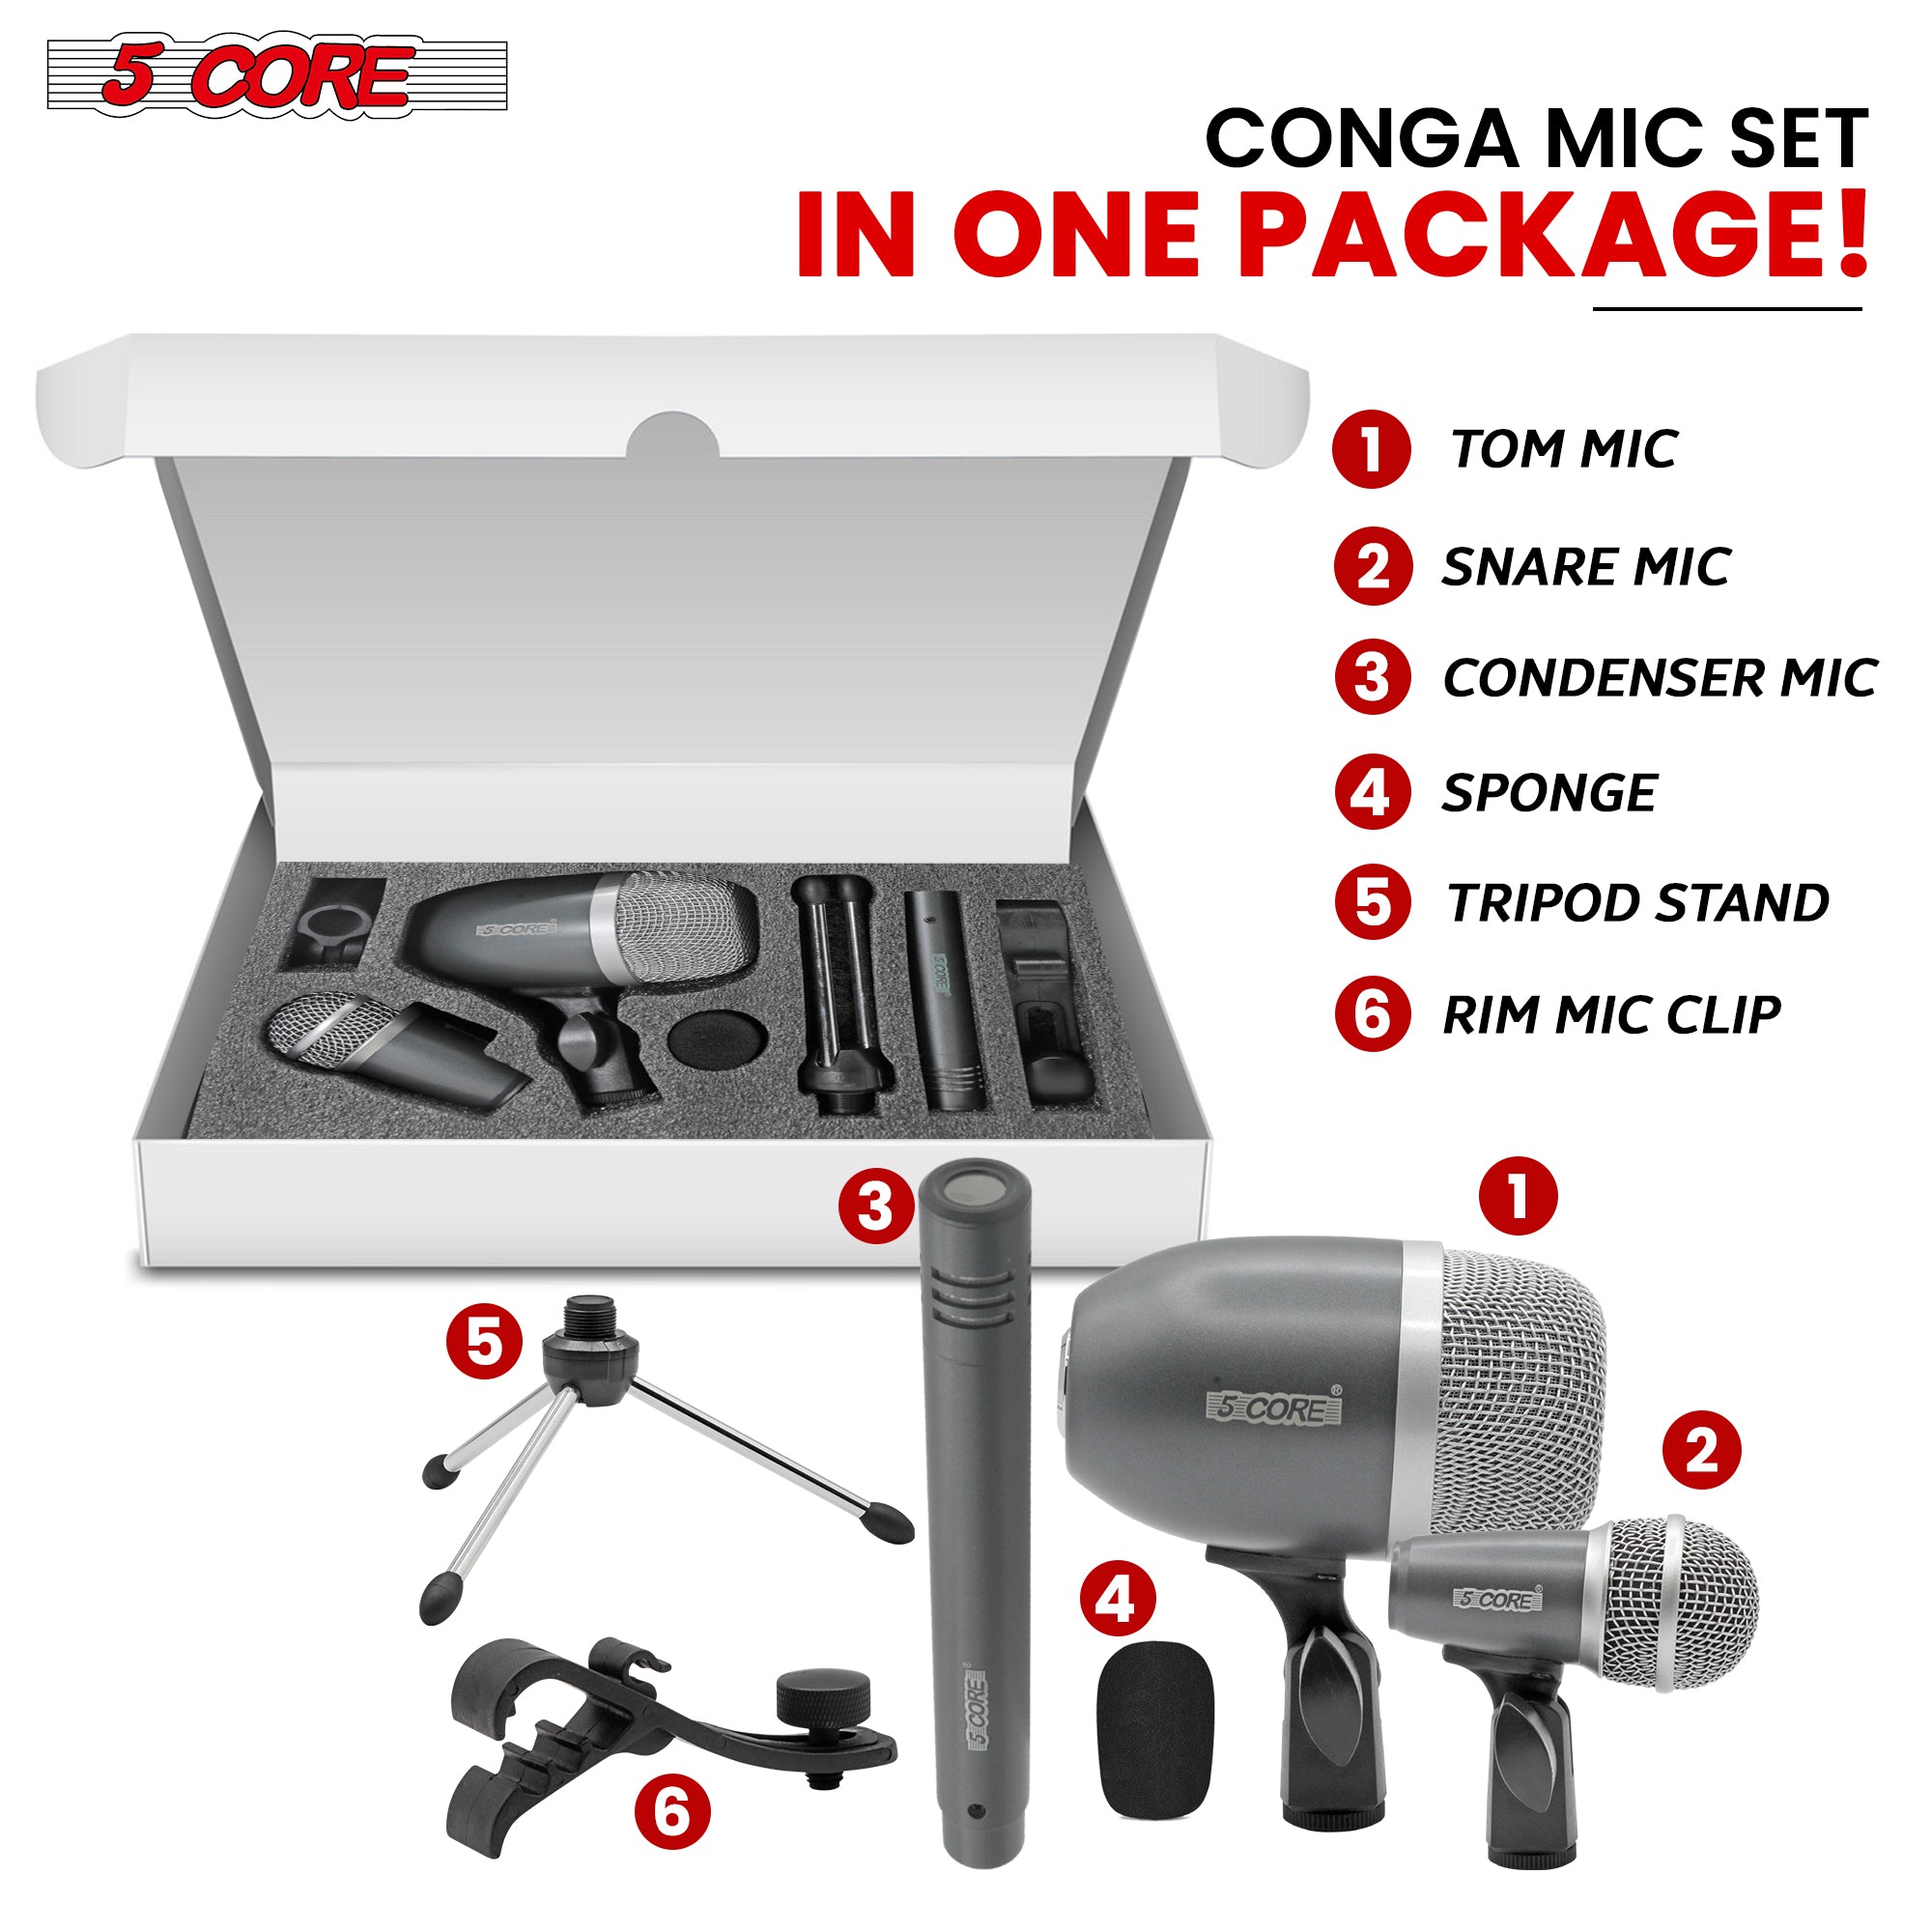 This Congo mic set Accessories include 1 Tom Mic, 1 Snare Mic, and 1 Conga Mic, providing a comprehensive solution for instrument recording.